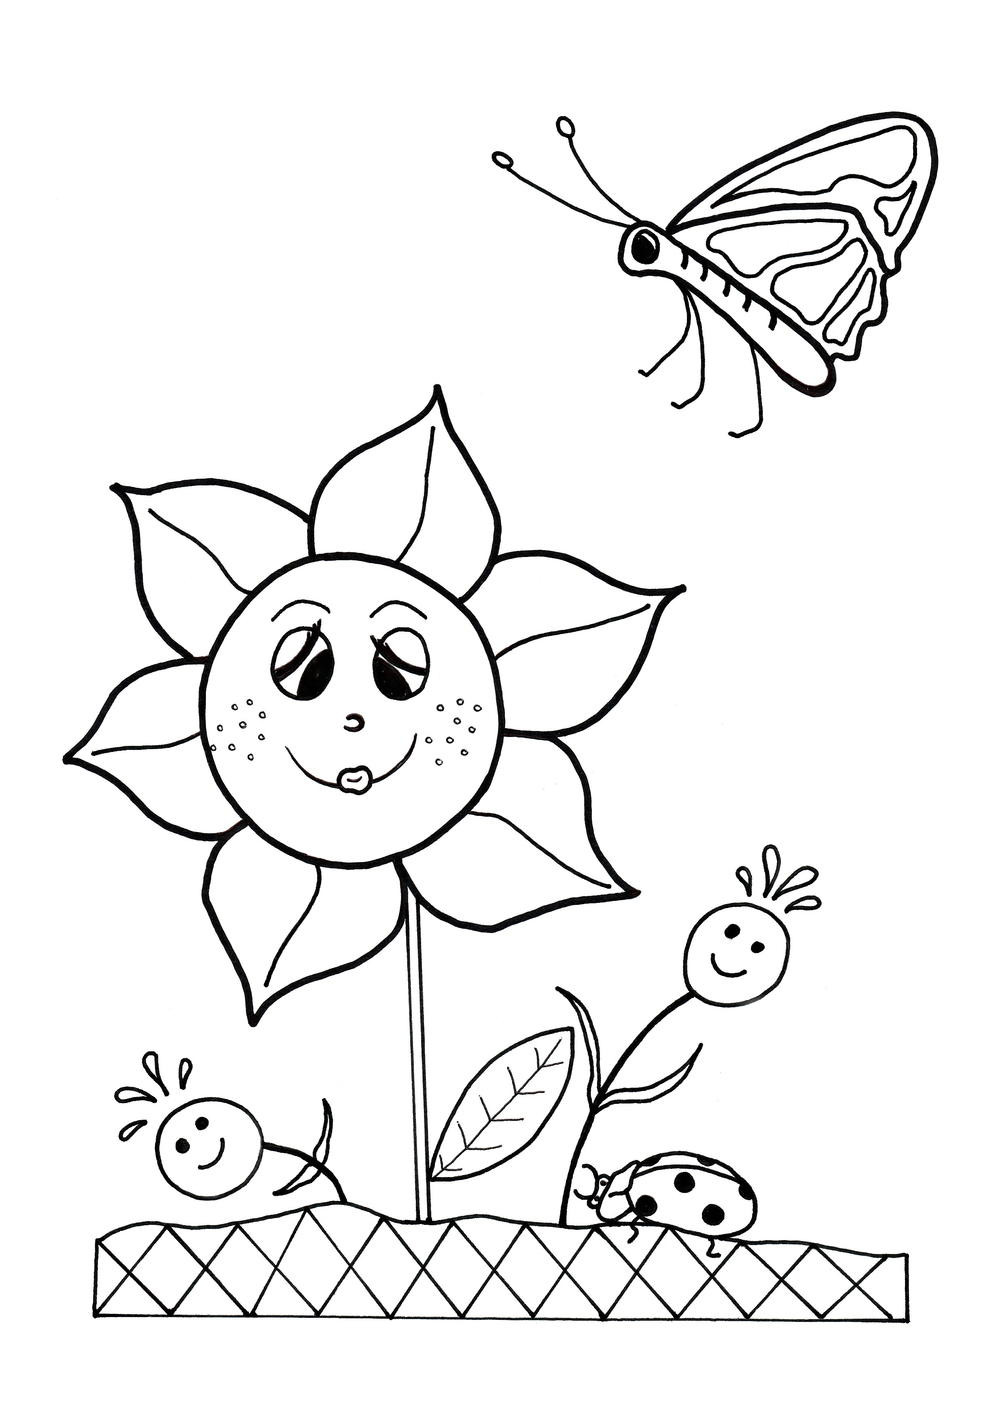 1000 Coloring Pages For Girls
 Dancing Flowers Spring Coloring Sheet